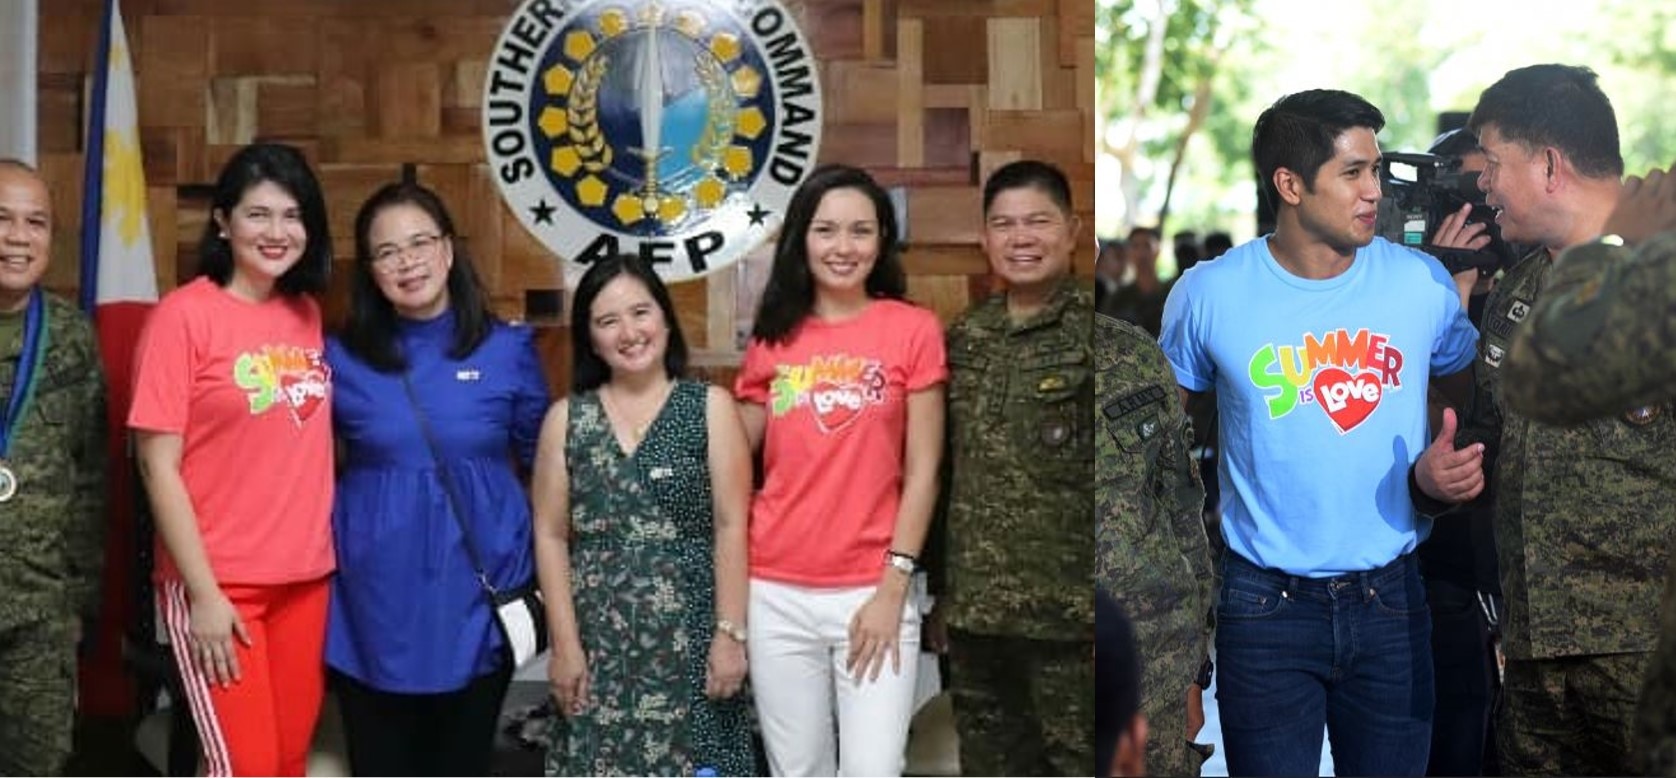 ABS-CBN honors soldiers anew at "Saludo" event in Lucena